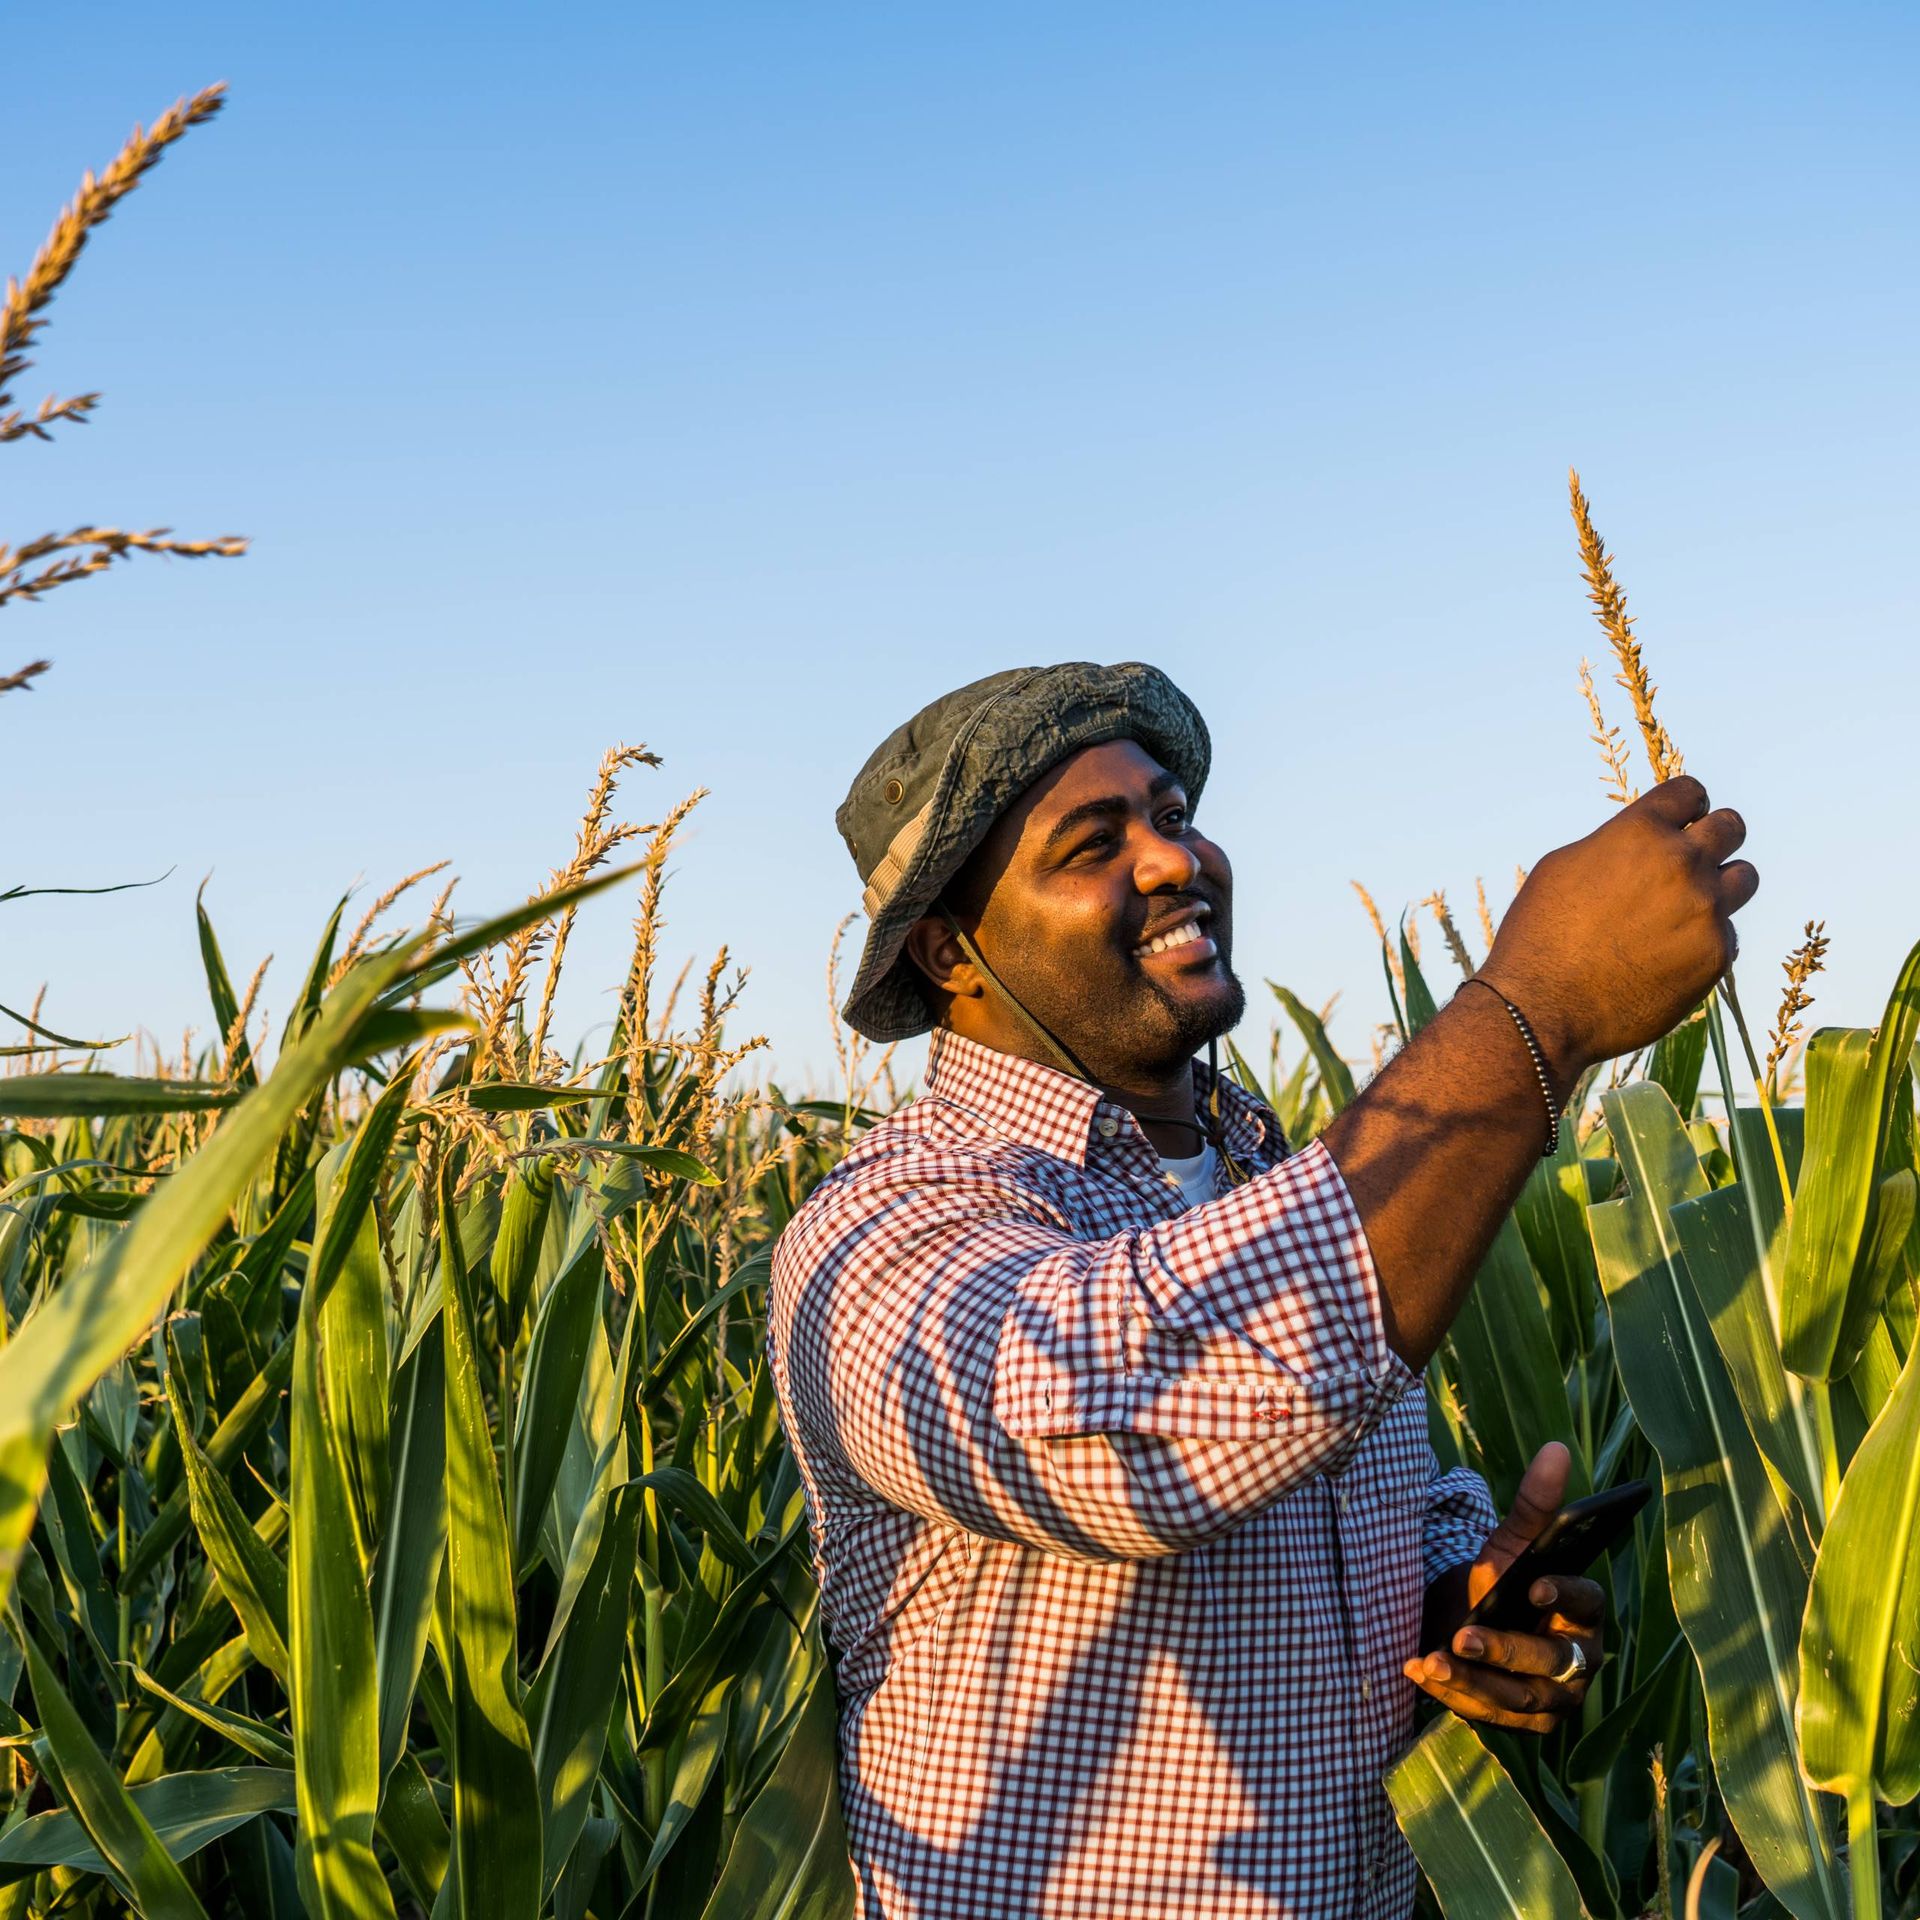 Image of a producer standing in a corn field